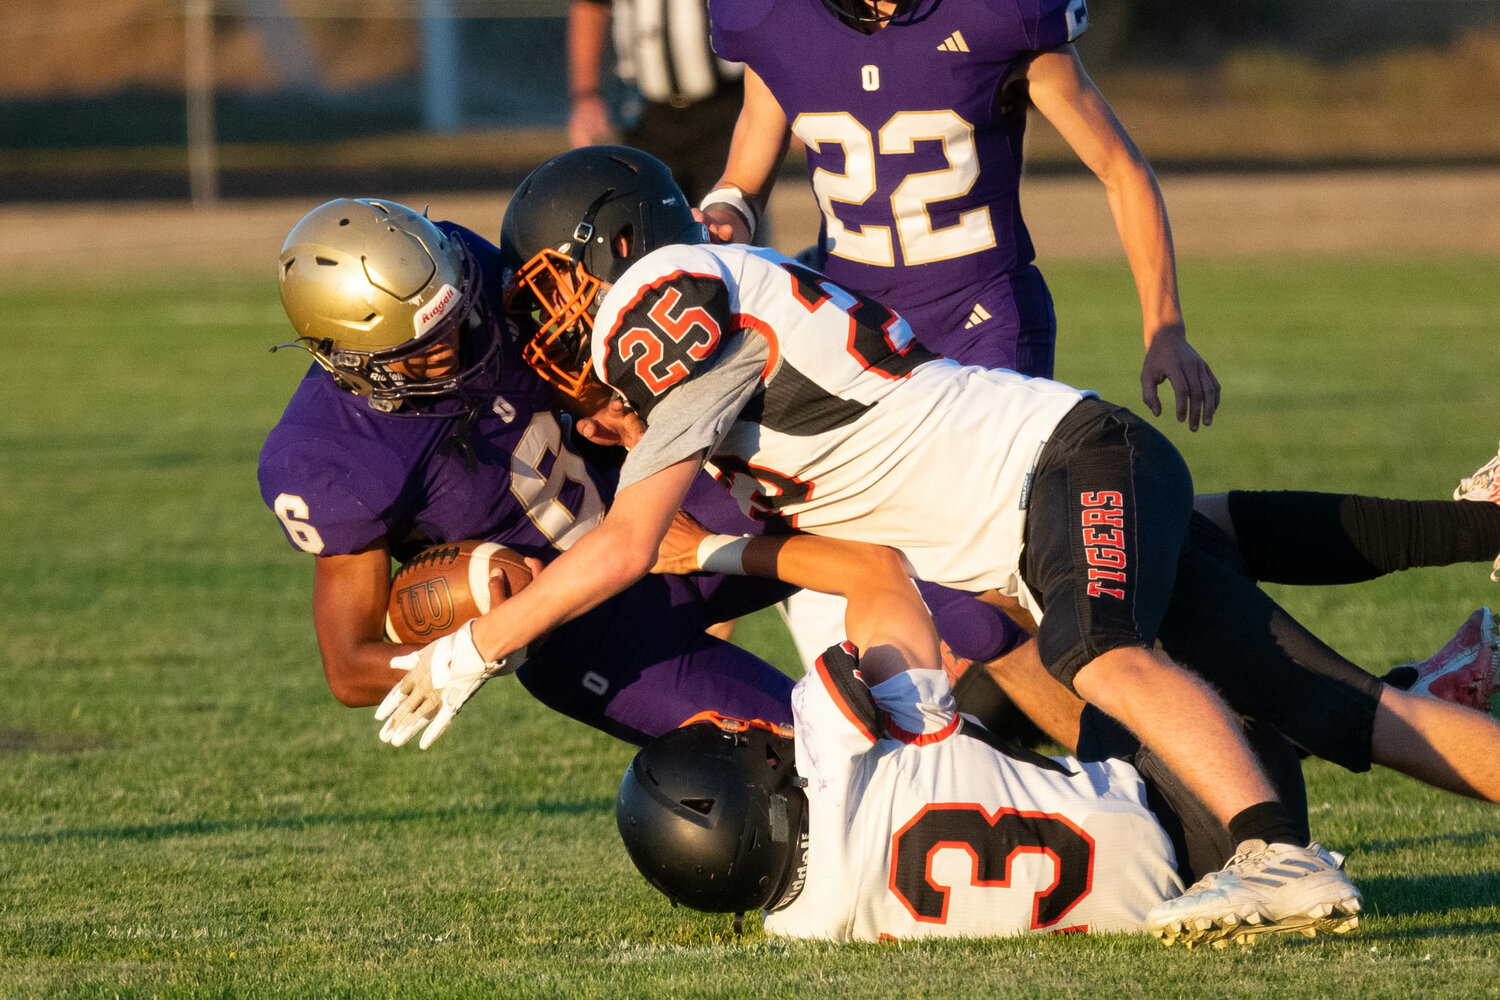 Napavine's Tyler Watson lays a  hit on Onalaska's Rodrigo Rodriguez during the first quarter of the Tigers' game against the Loggers on Sept. 8.